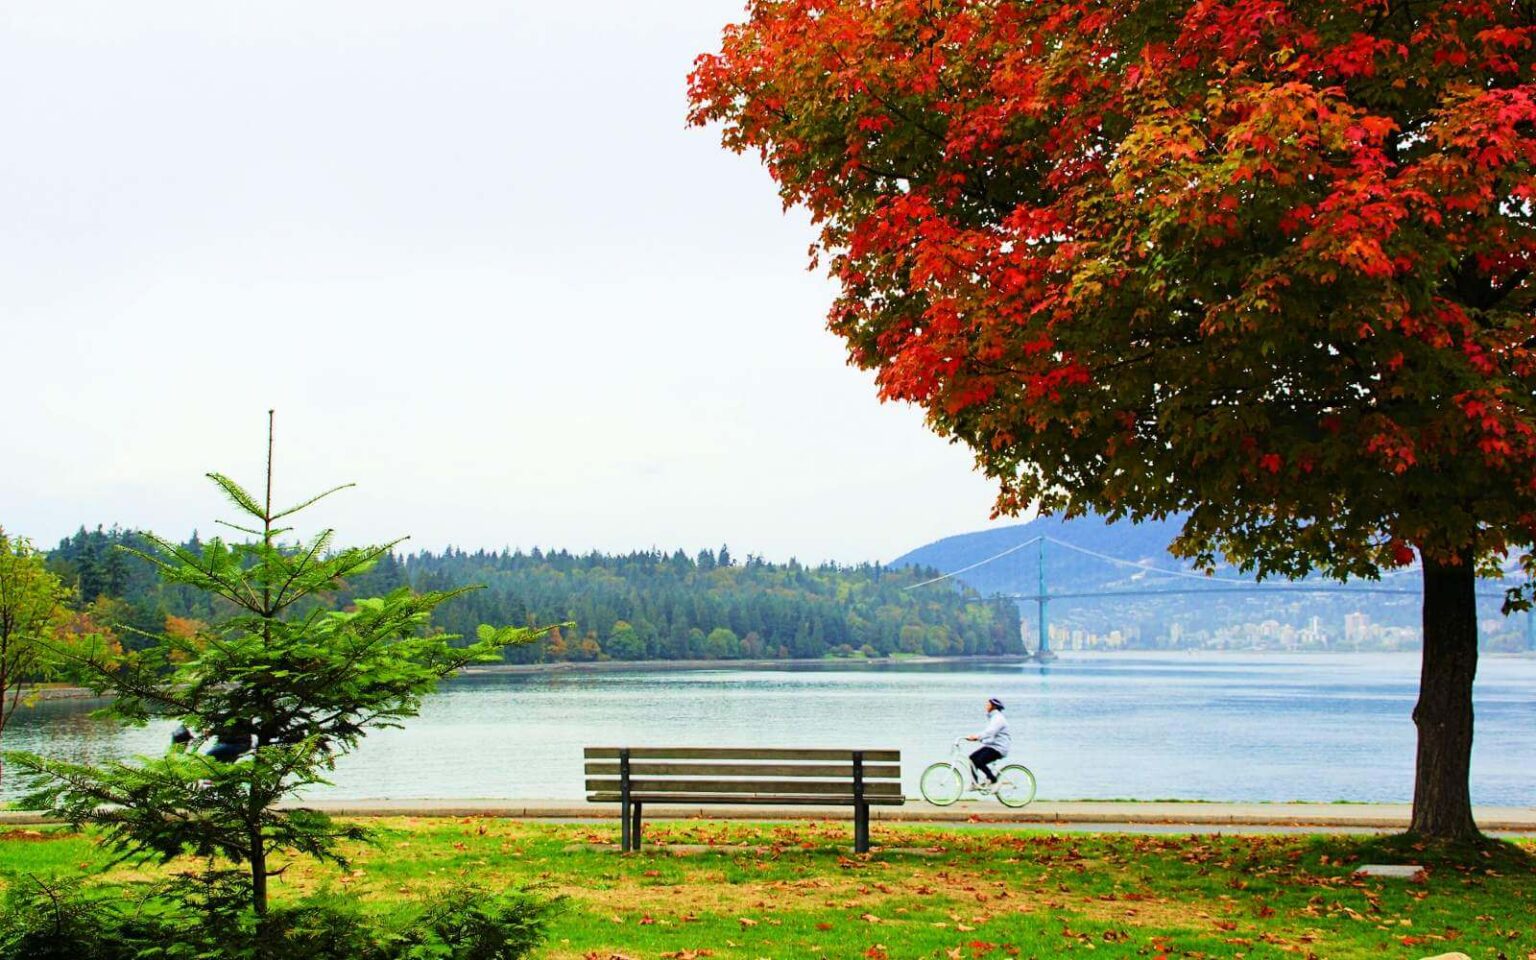 Visiting Vancouver in October Events, Festivals & Best Things to Do